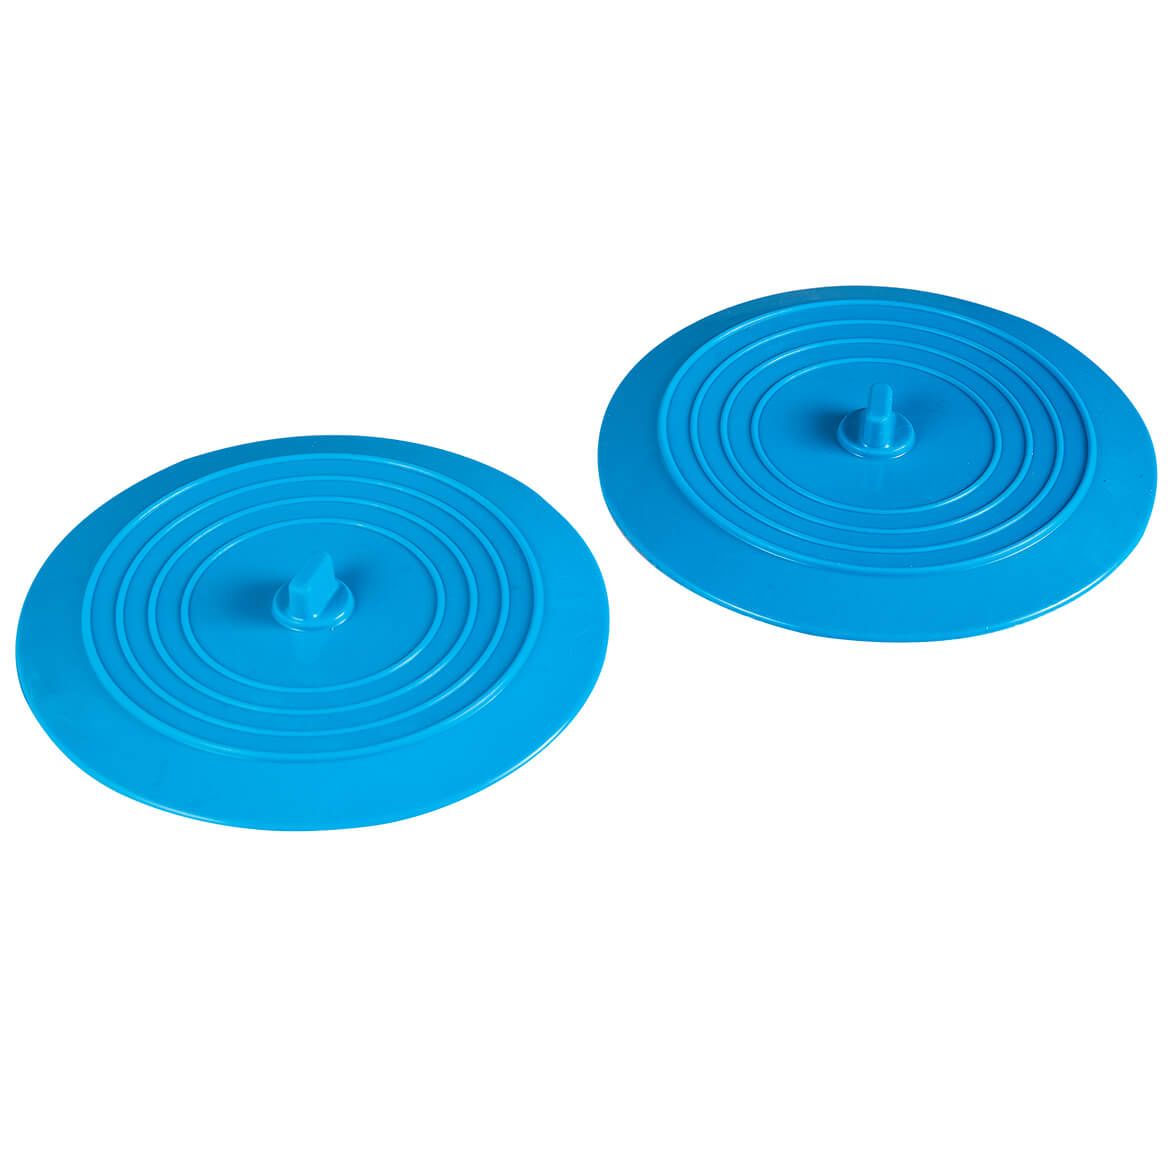 Silicone Sink Plugs, Set of 2 + '-' + 374292